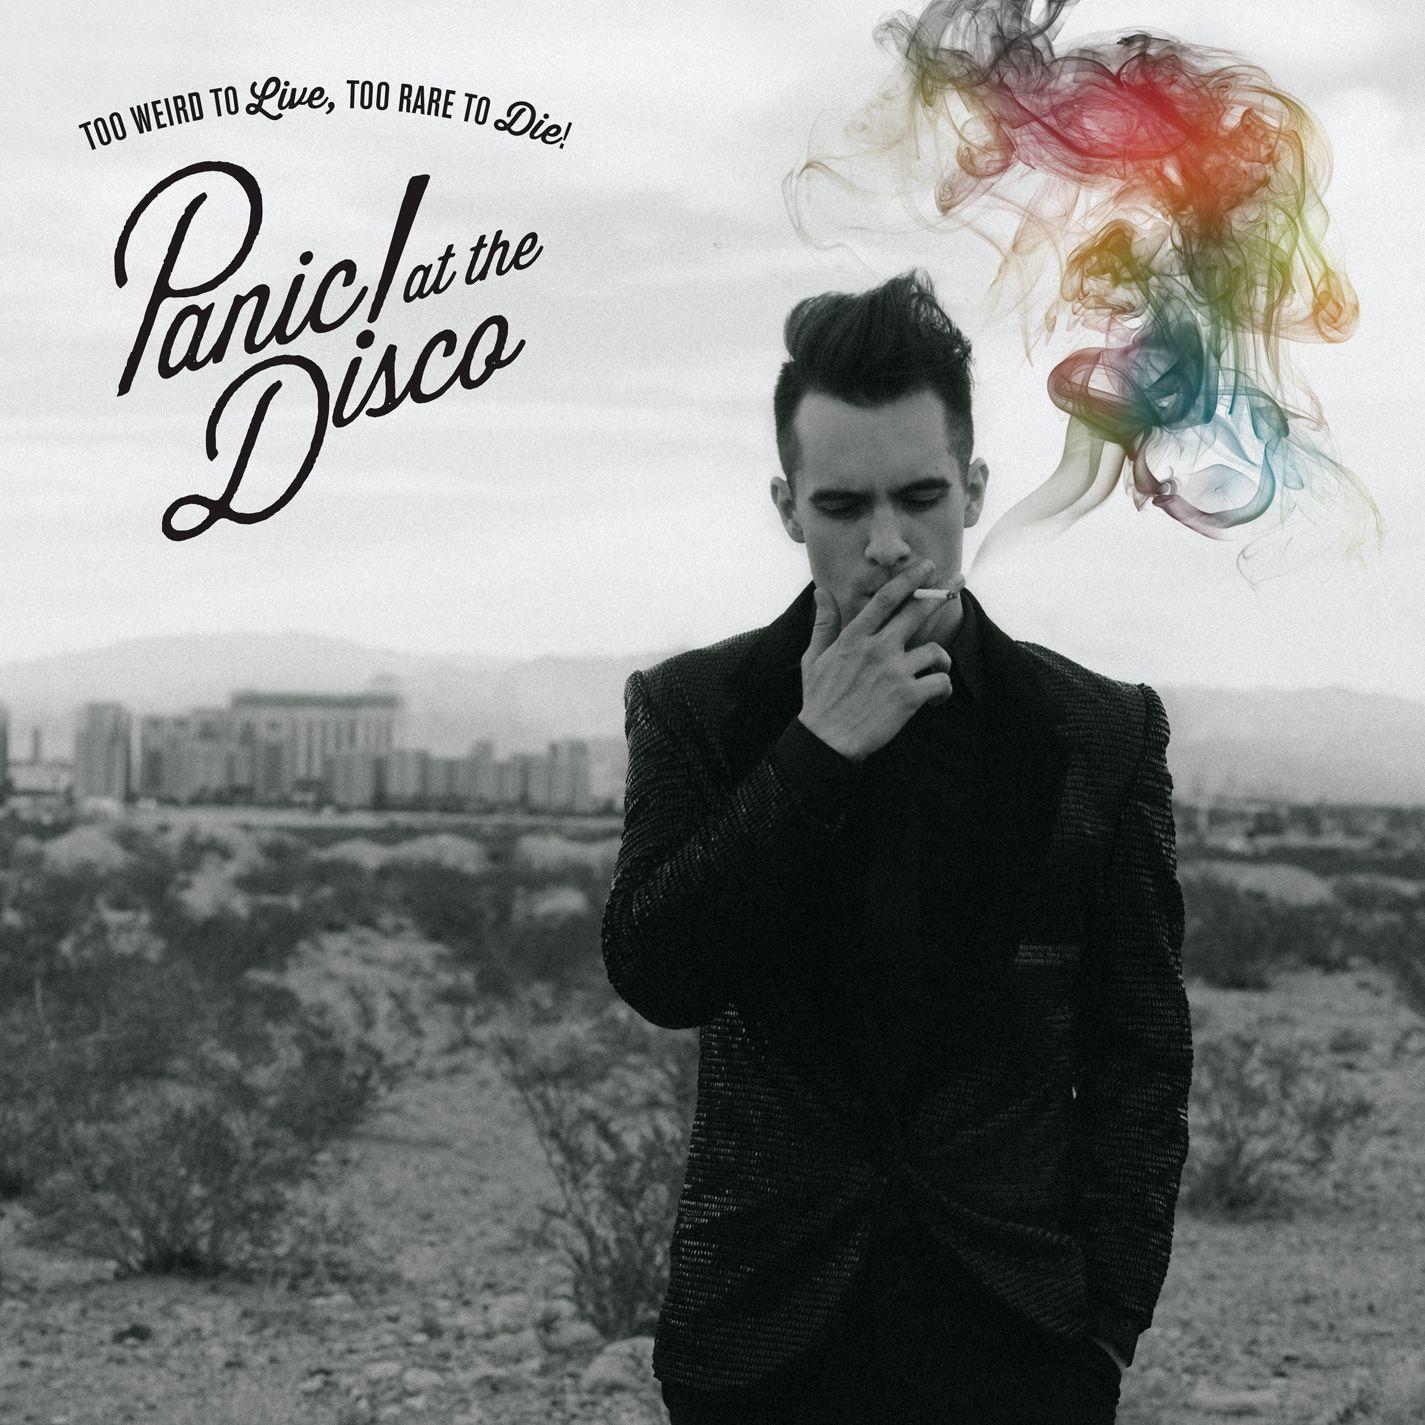 Stream Free Songs by Panic! At the Disco & Similar Artists